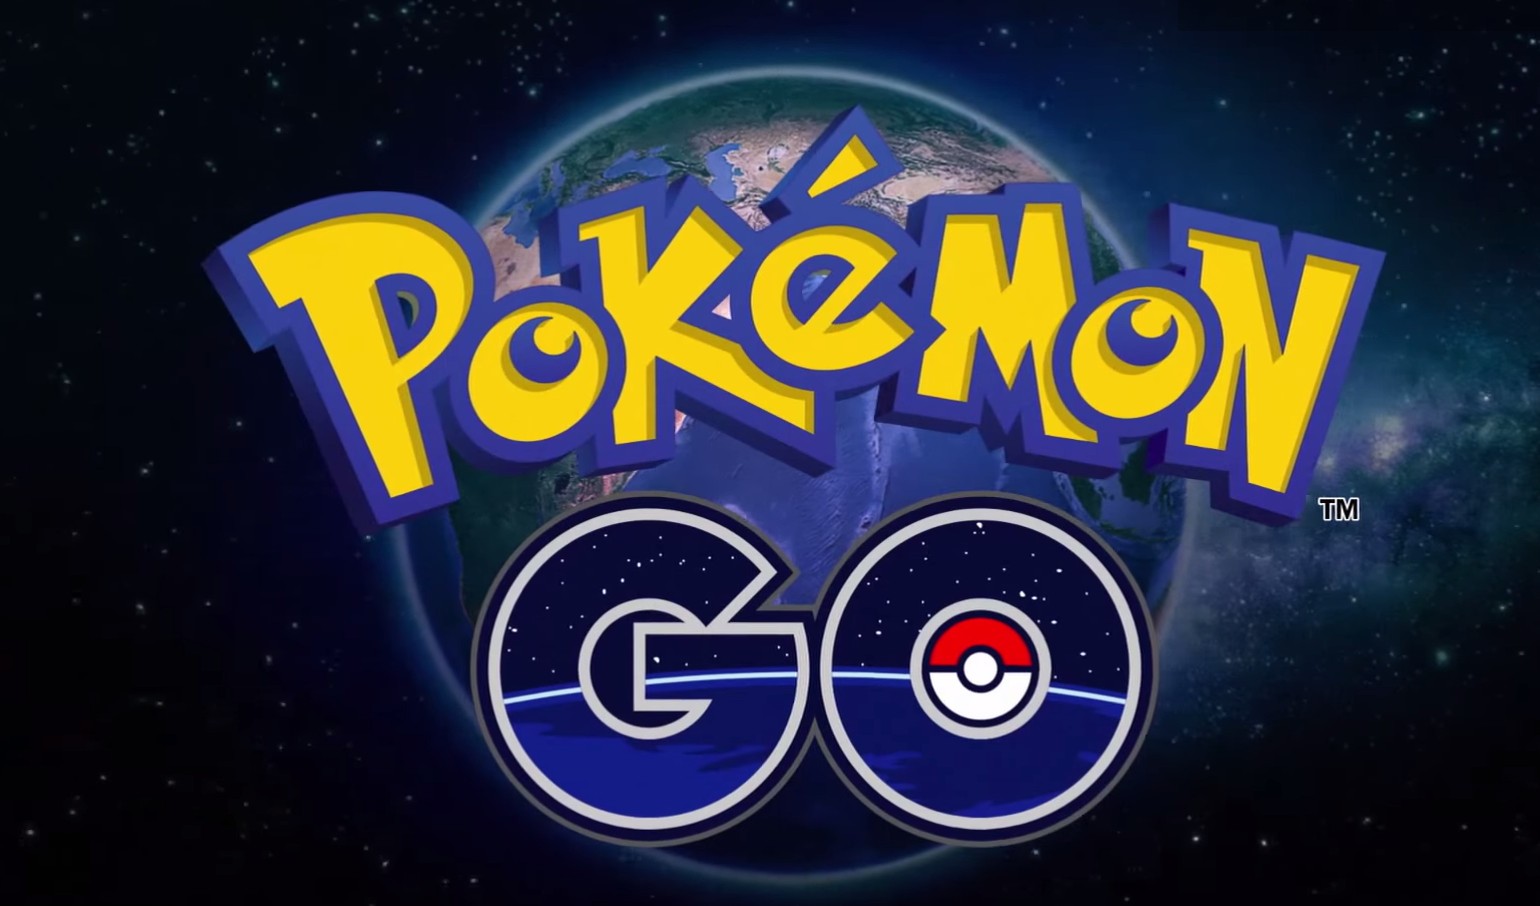 Nintendo Announces Pokemon GO Mobile Game, Coming to Android & iOS in 2016